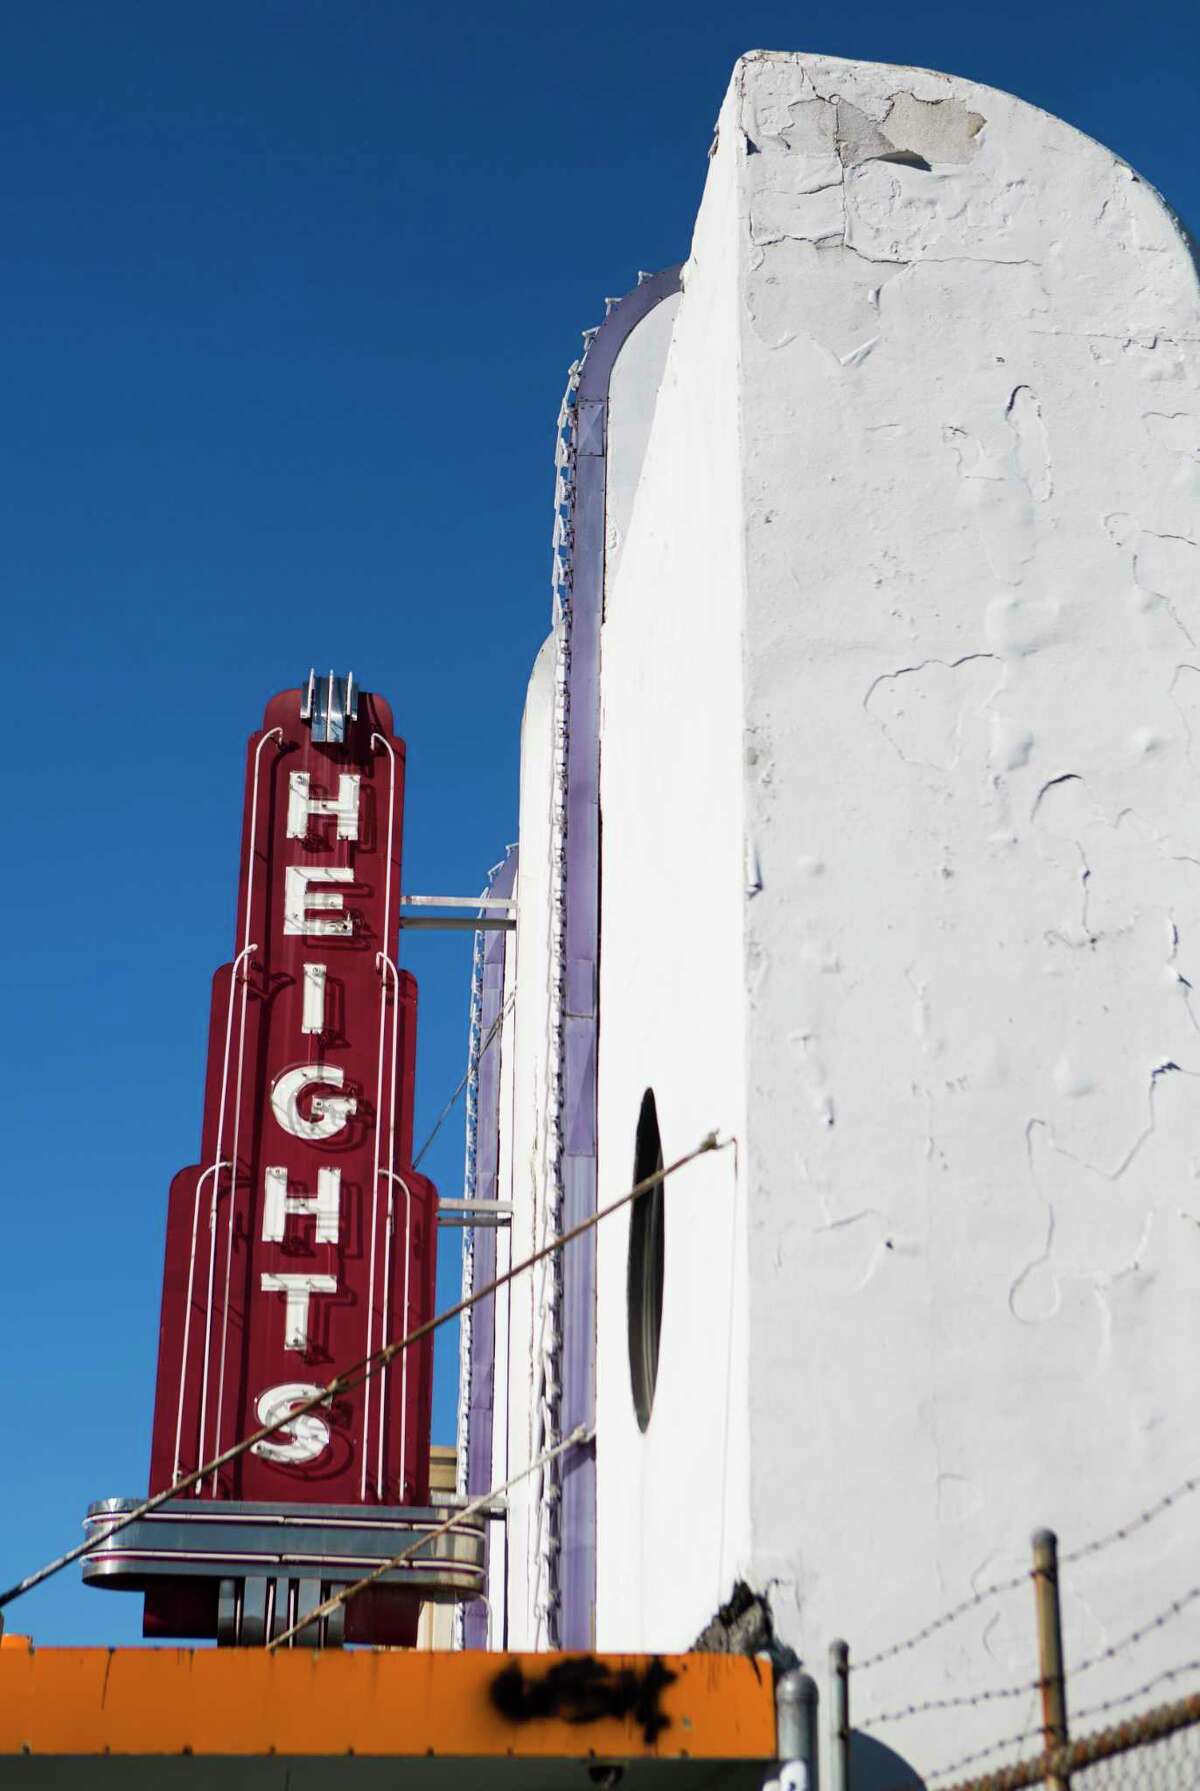 Heights theatre was first built in 1923 as a movie theater, now the 7,058-square-foot building is currently now being renovated as a multi-use entertaiment venue. Friday, Dec. 18, 2015, in Houston. ( Marie D. De Jesus / Houston Chronicle )